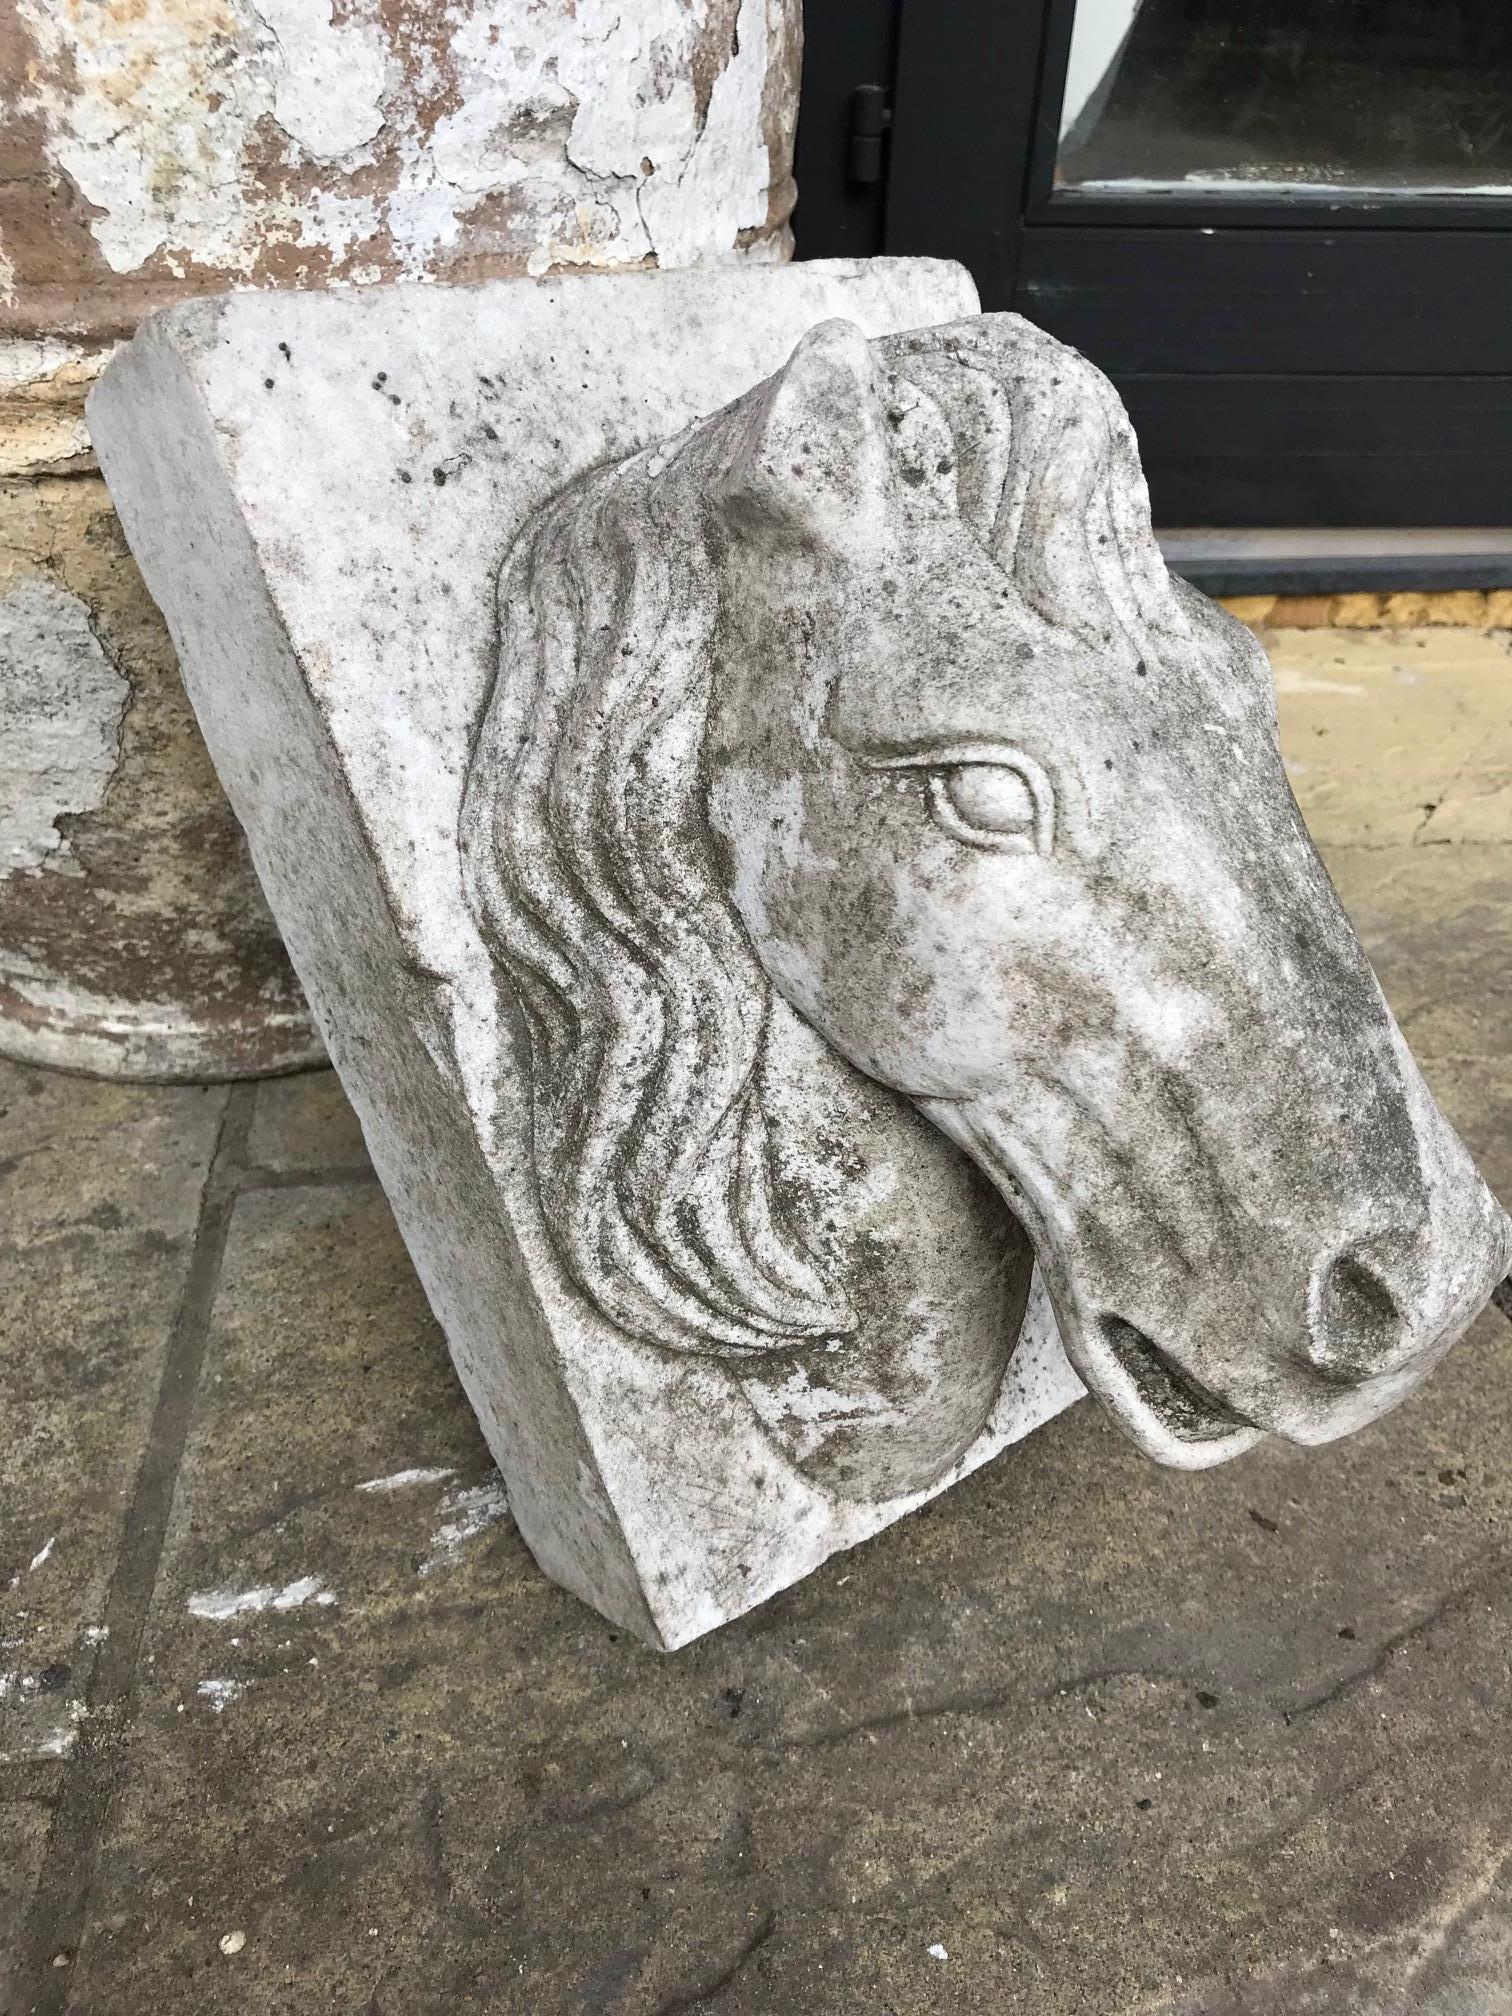 An elegant marble sculpture of a horse head used as a keystone most probably for an archway. French, early 20th century. Some damage to an ear and a visible signs of wear. One side of the horses head appears more weathered than the other half.